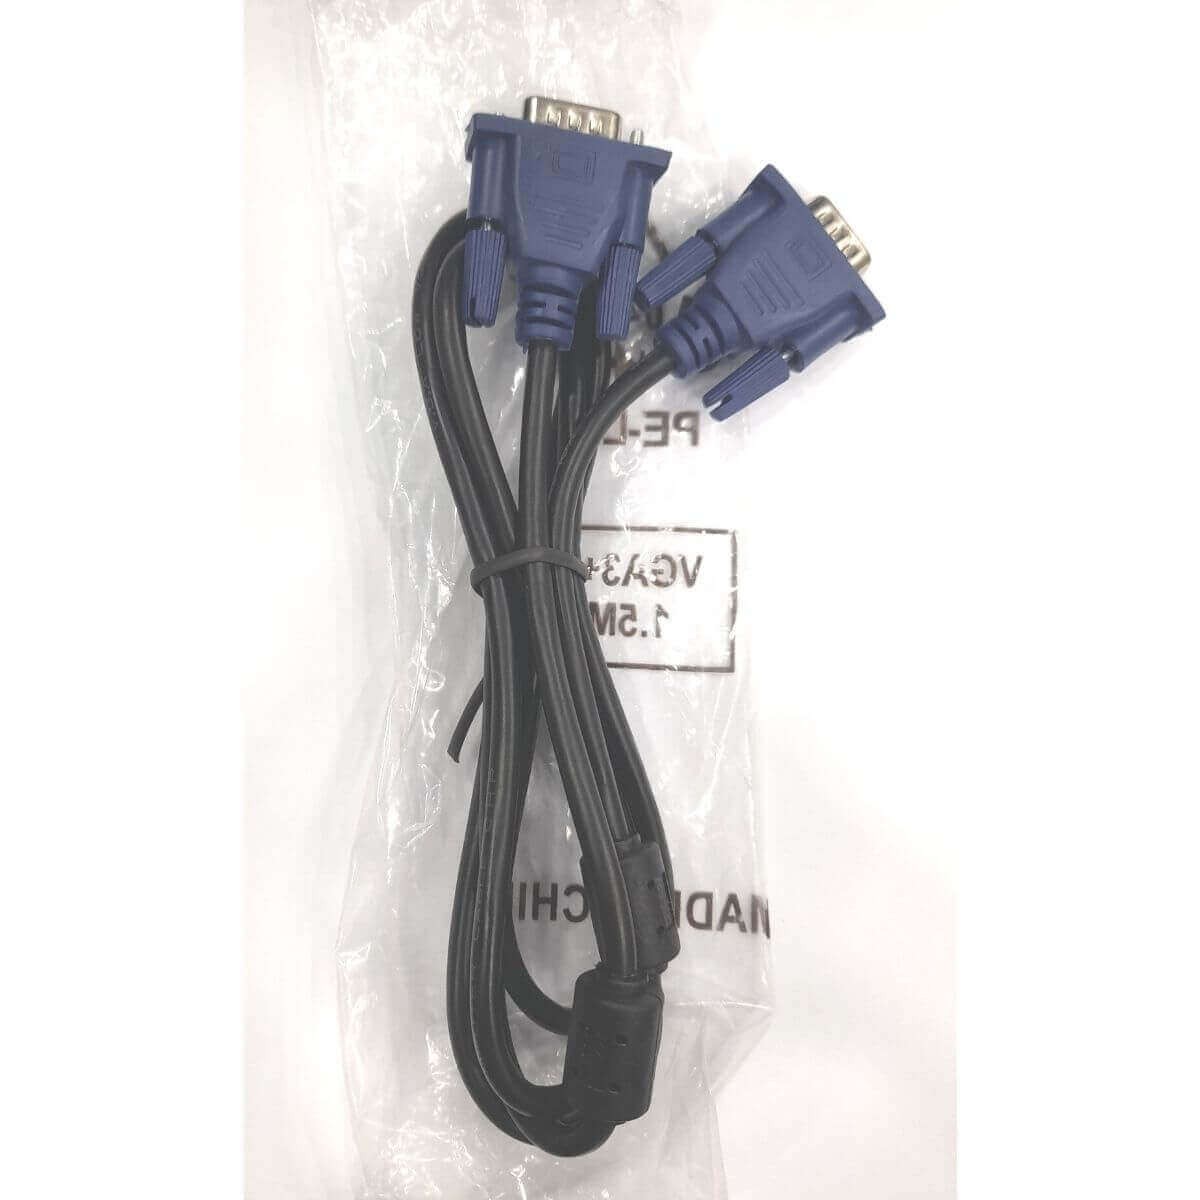 VGA Cable 1.5 Meter Low Quality Cable BD